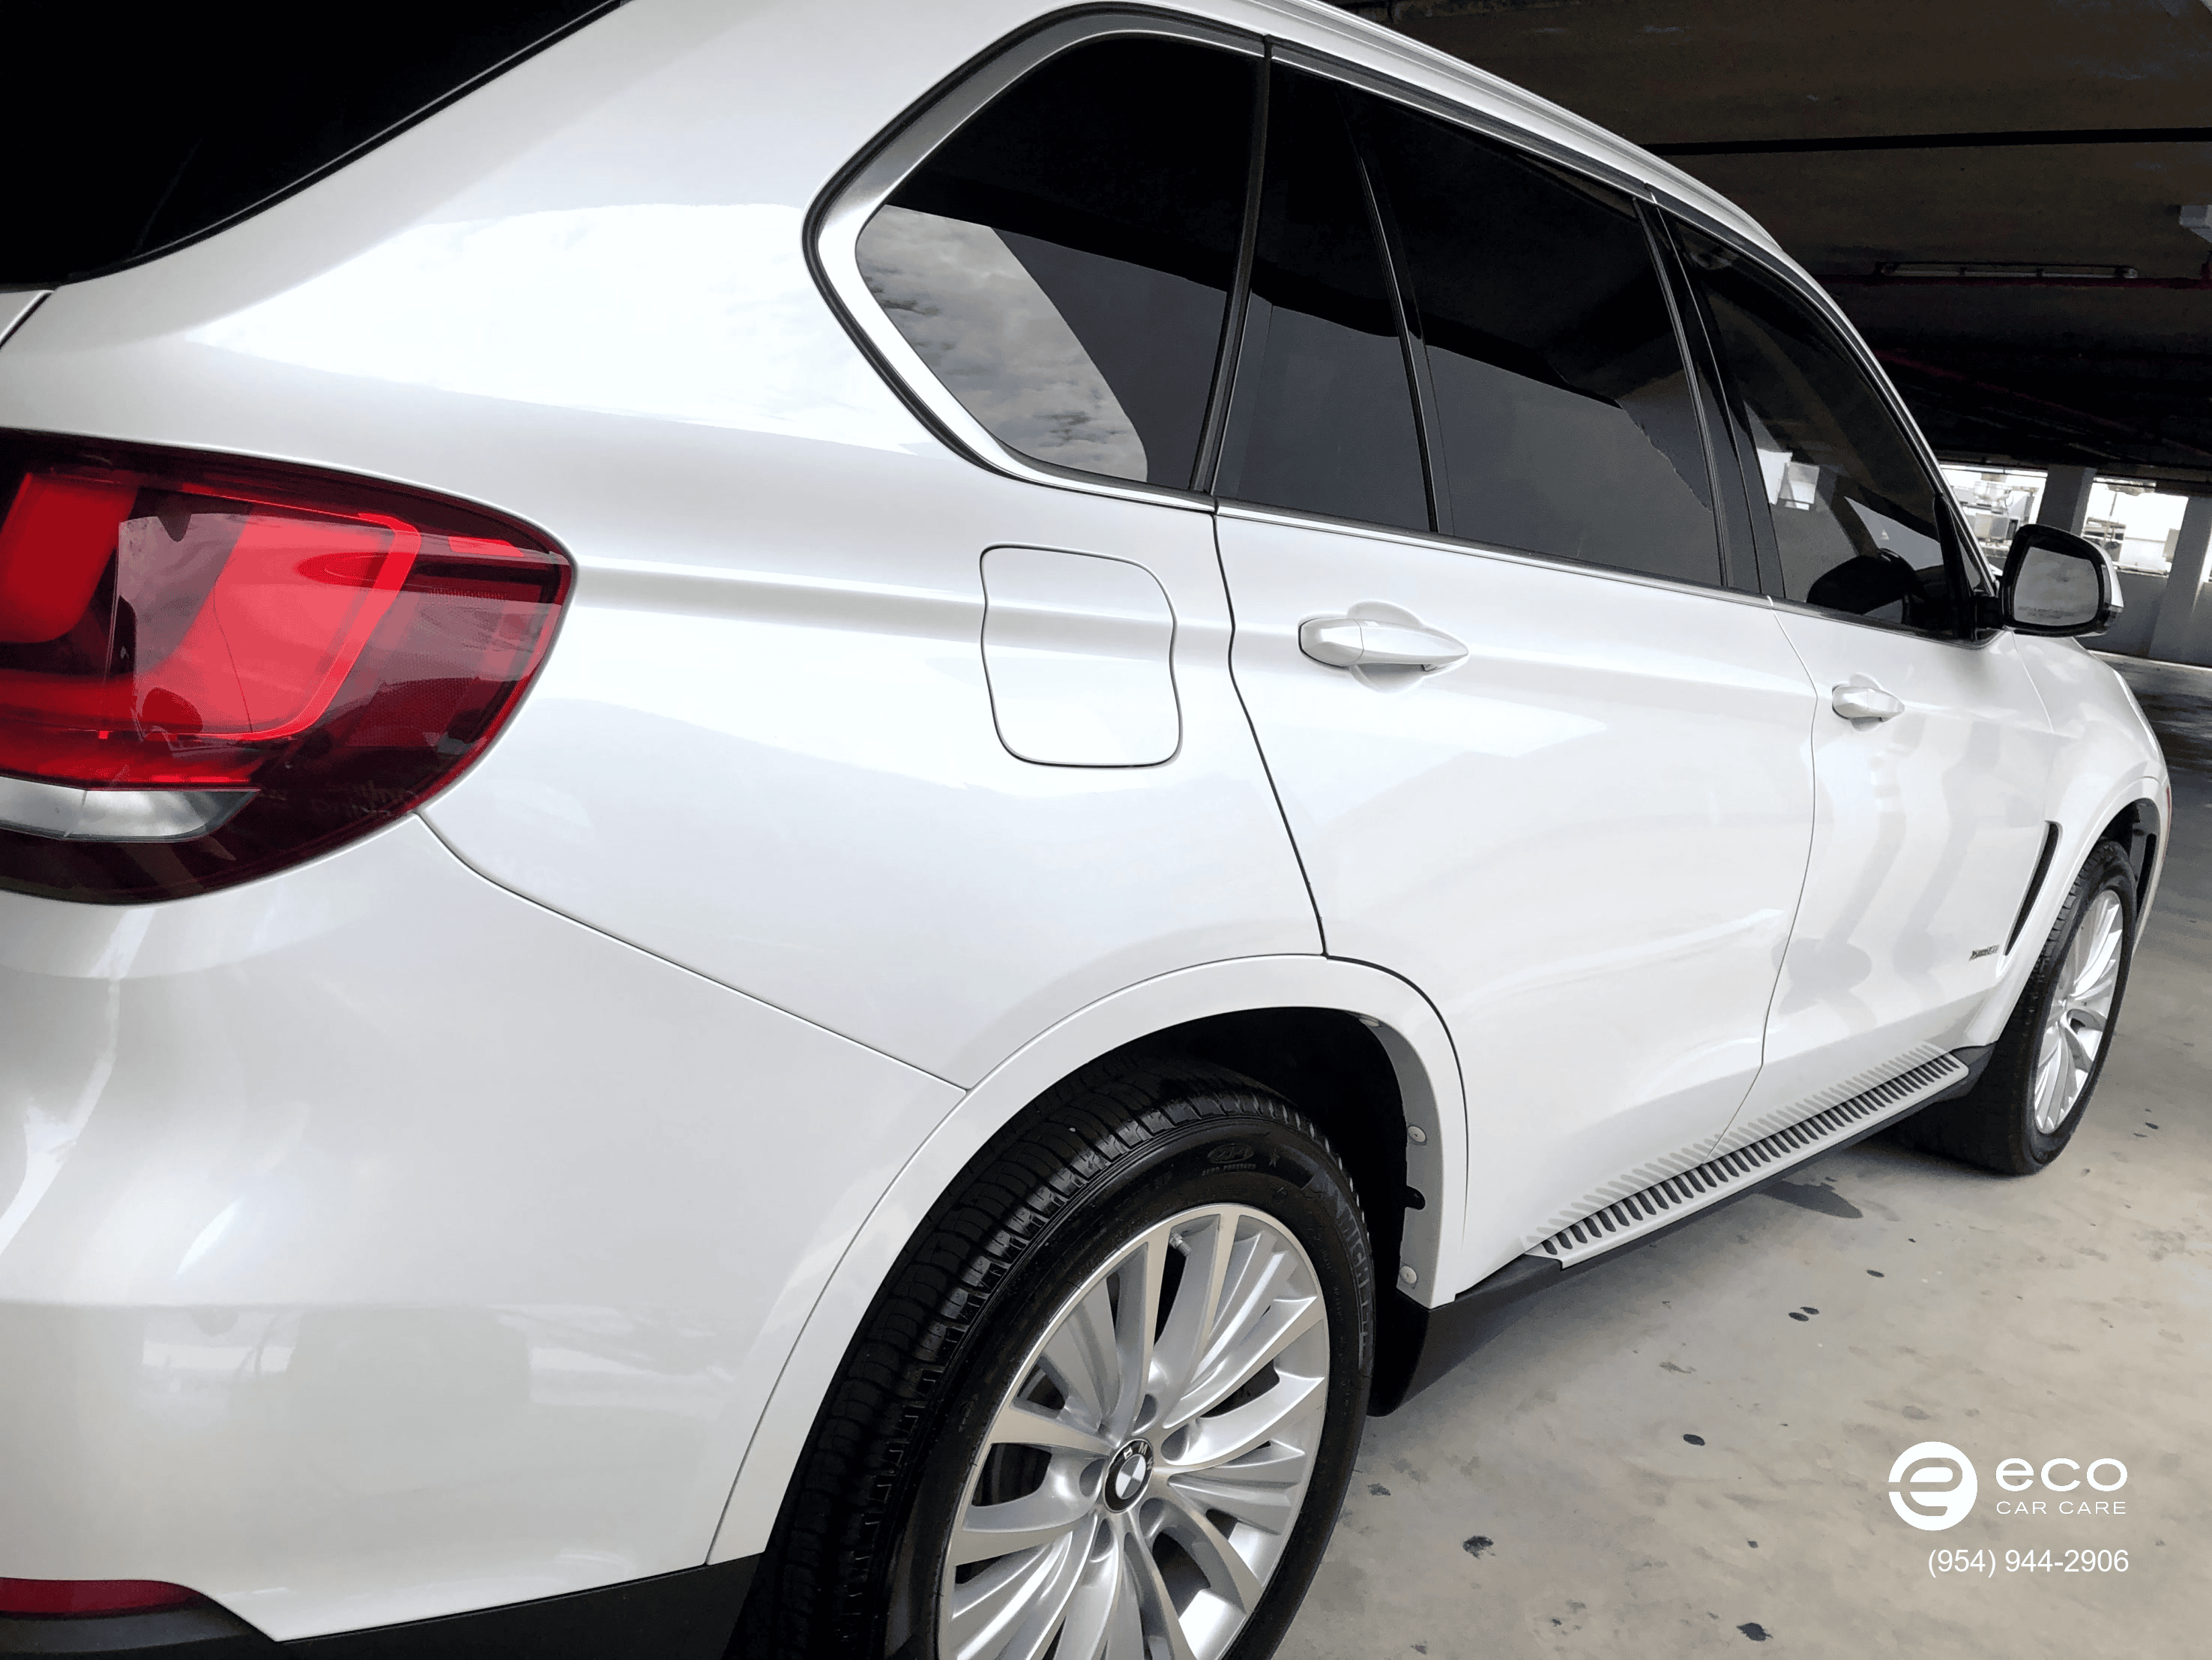 window tinting carbon film for suvs windshield